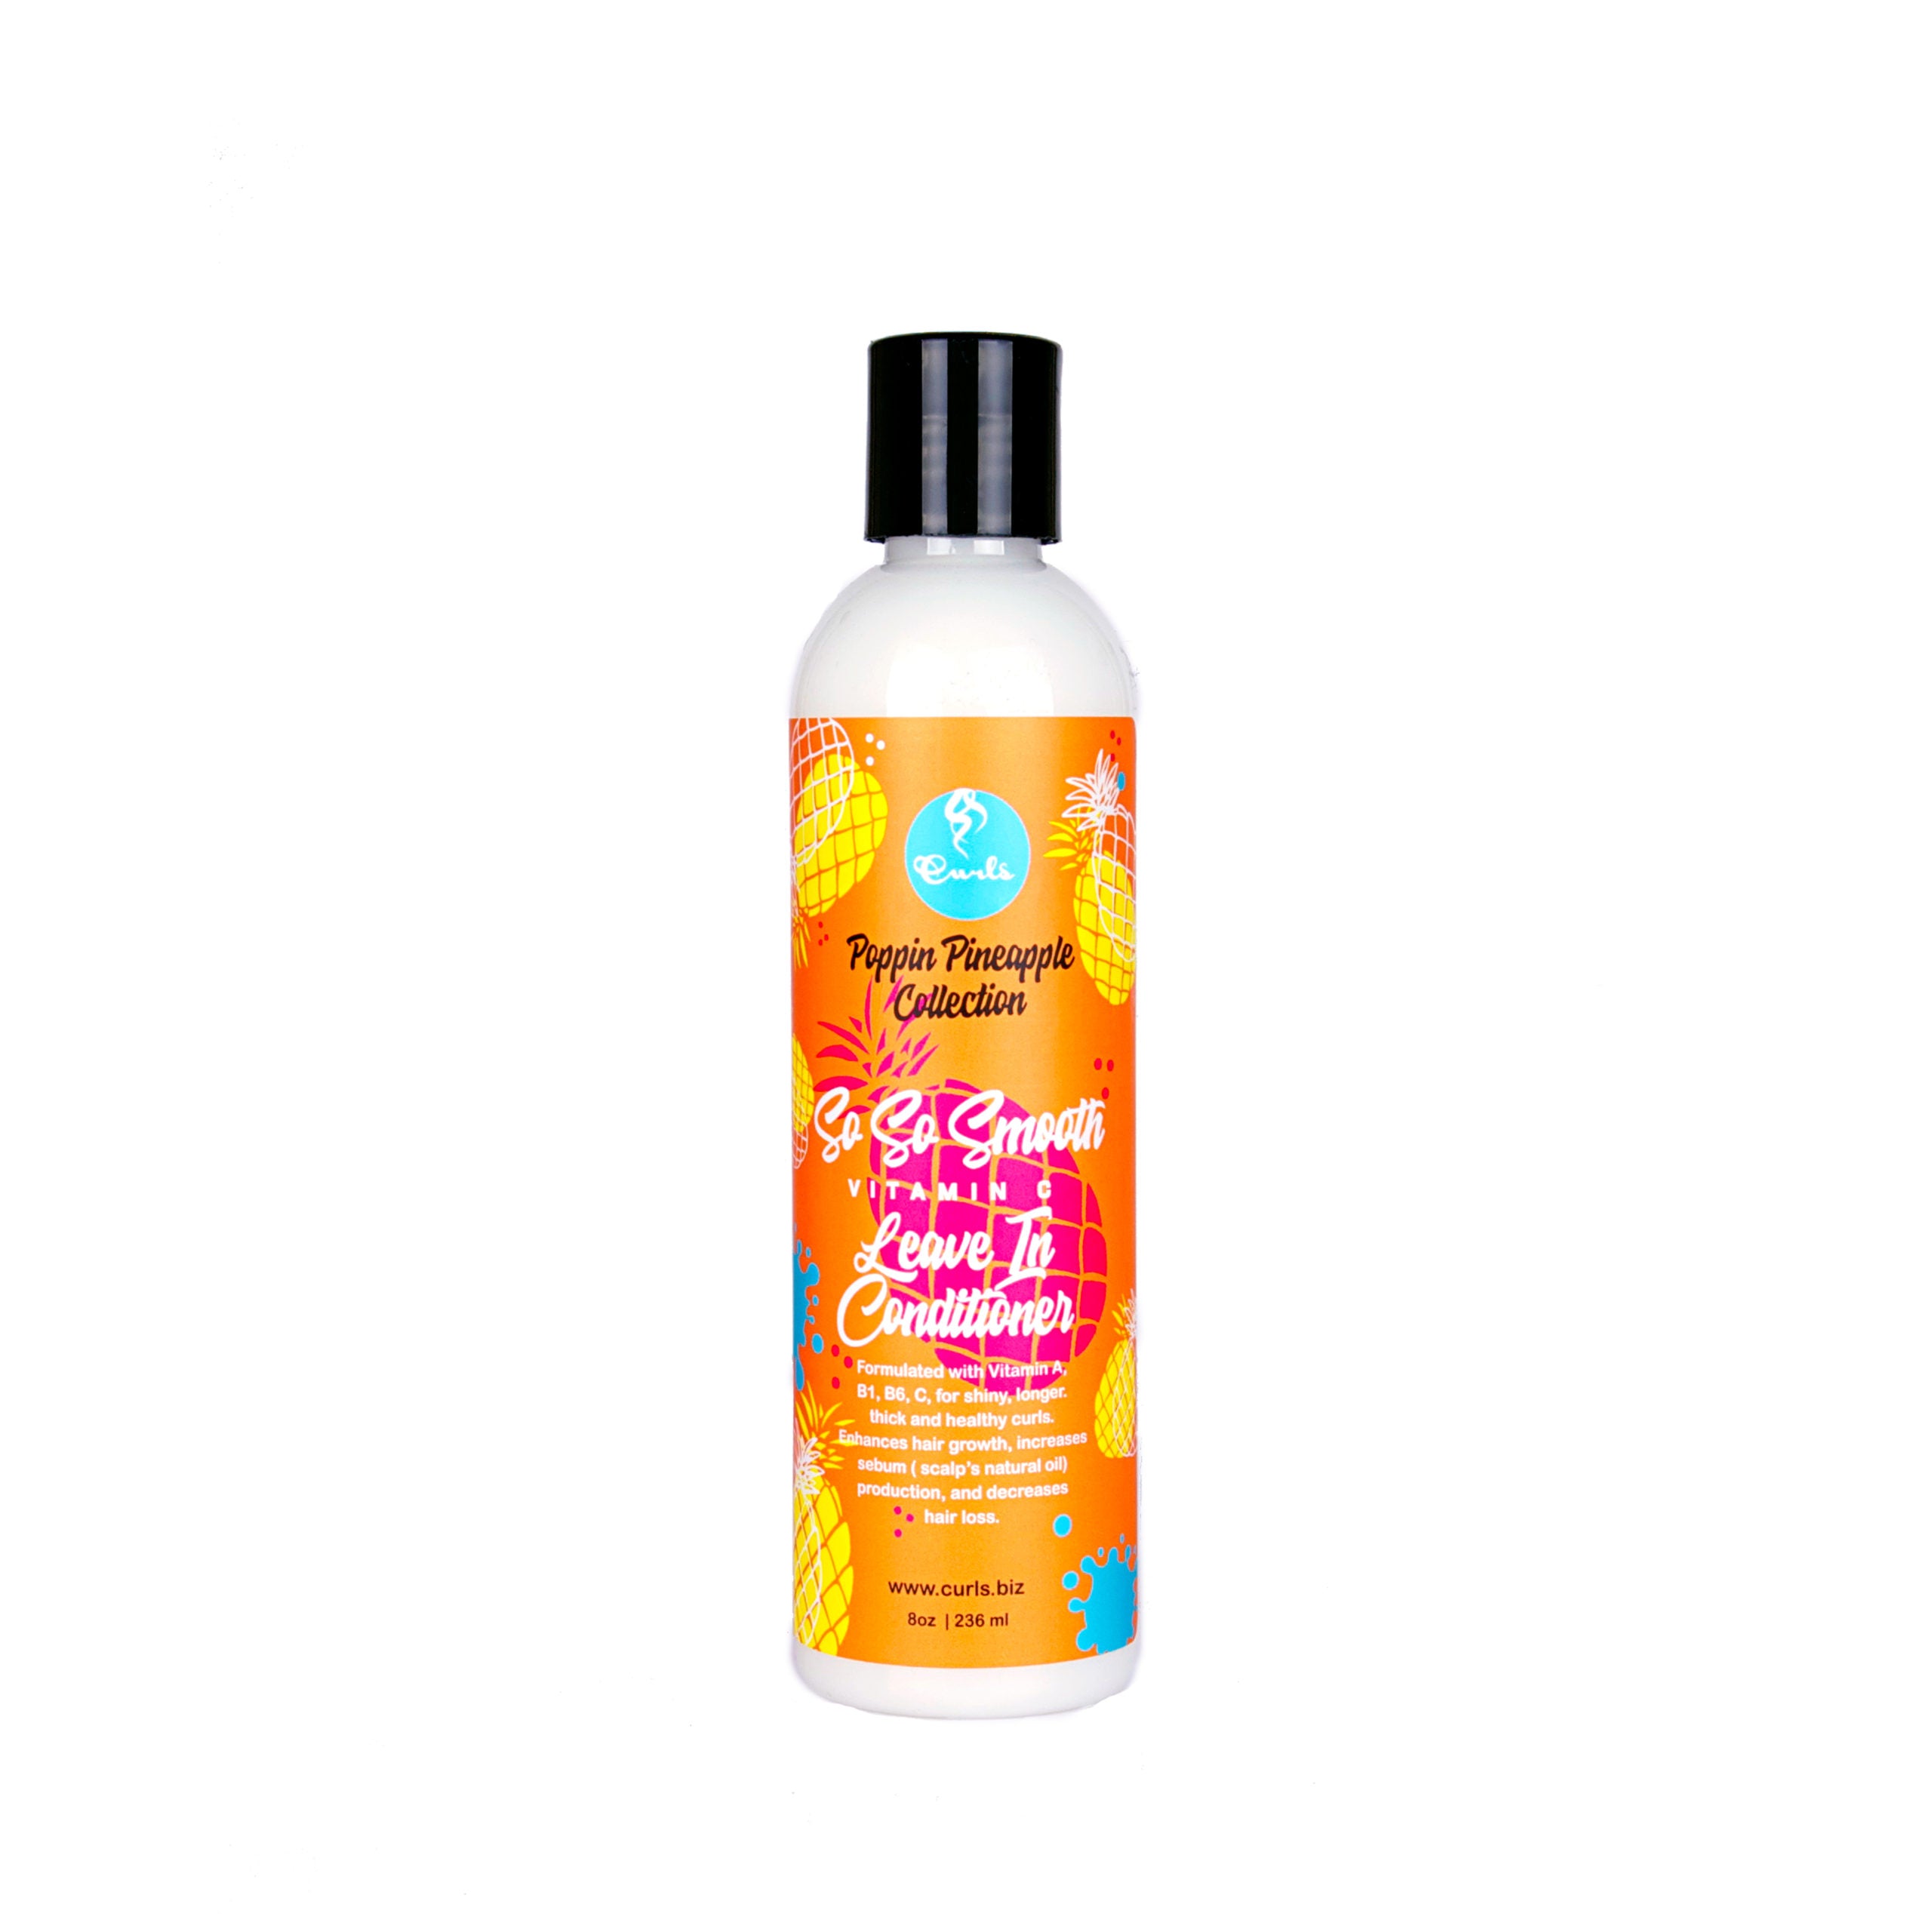 Curls Poppin Pineapple So So Smooth Vitamin C Leave-In Conditioner